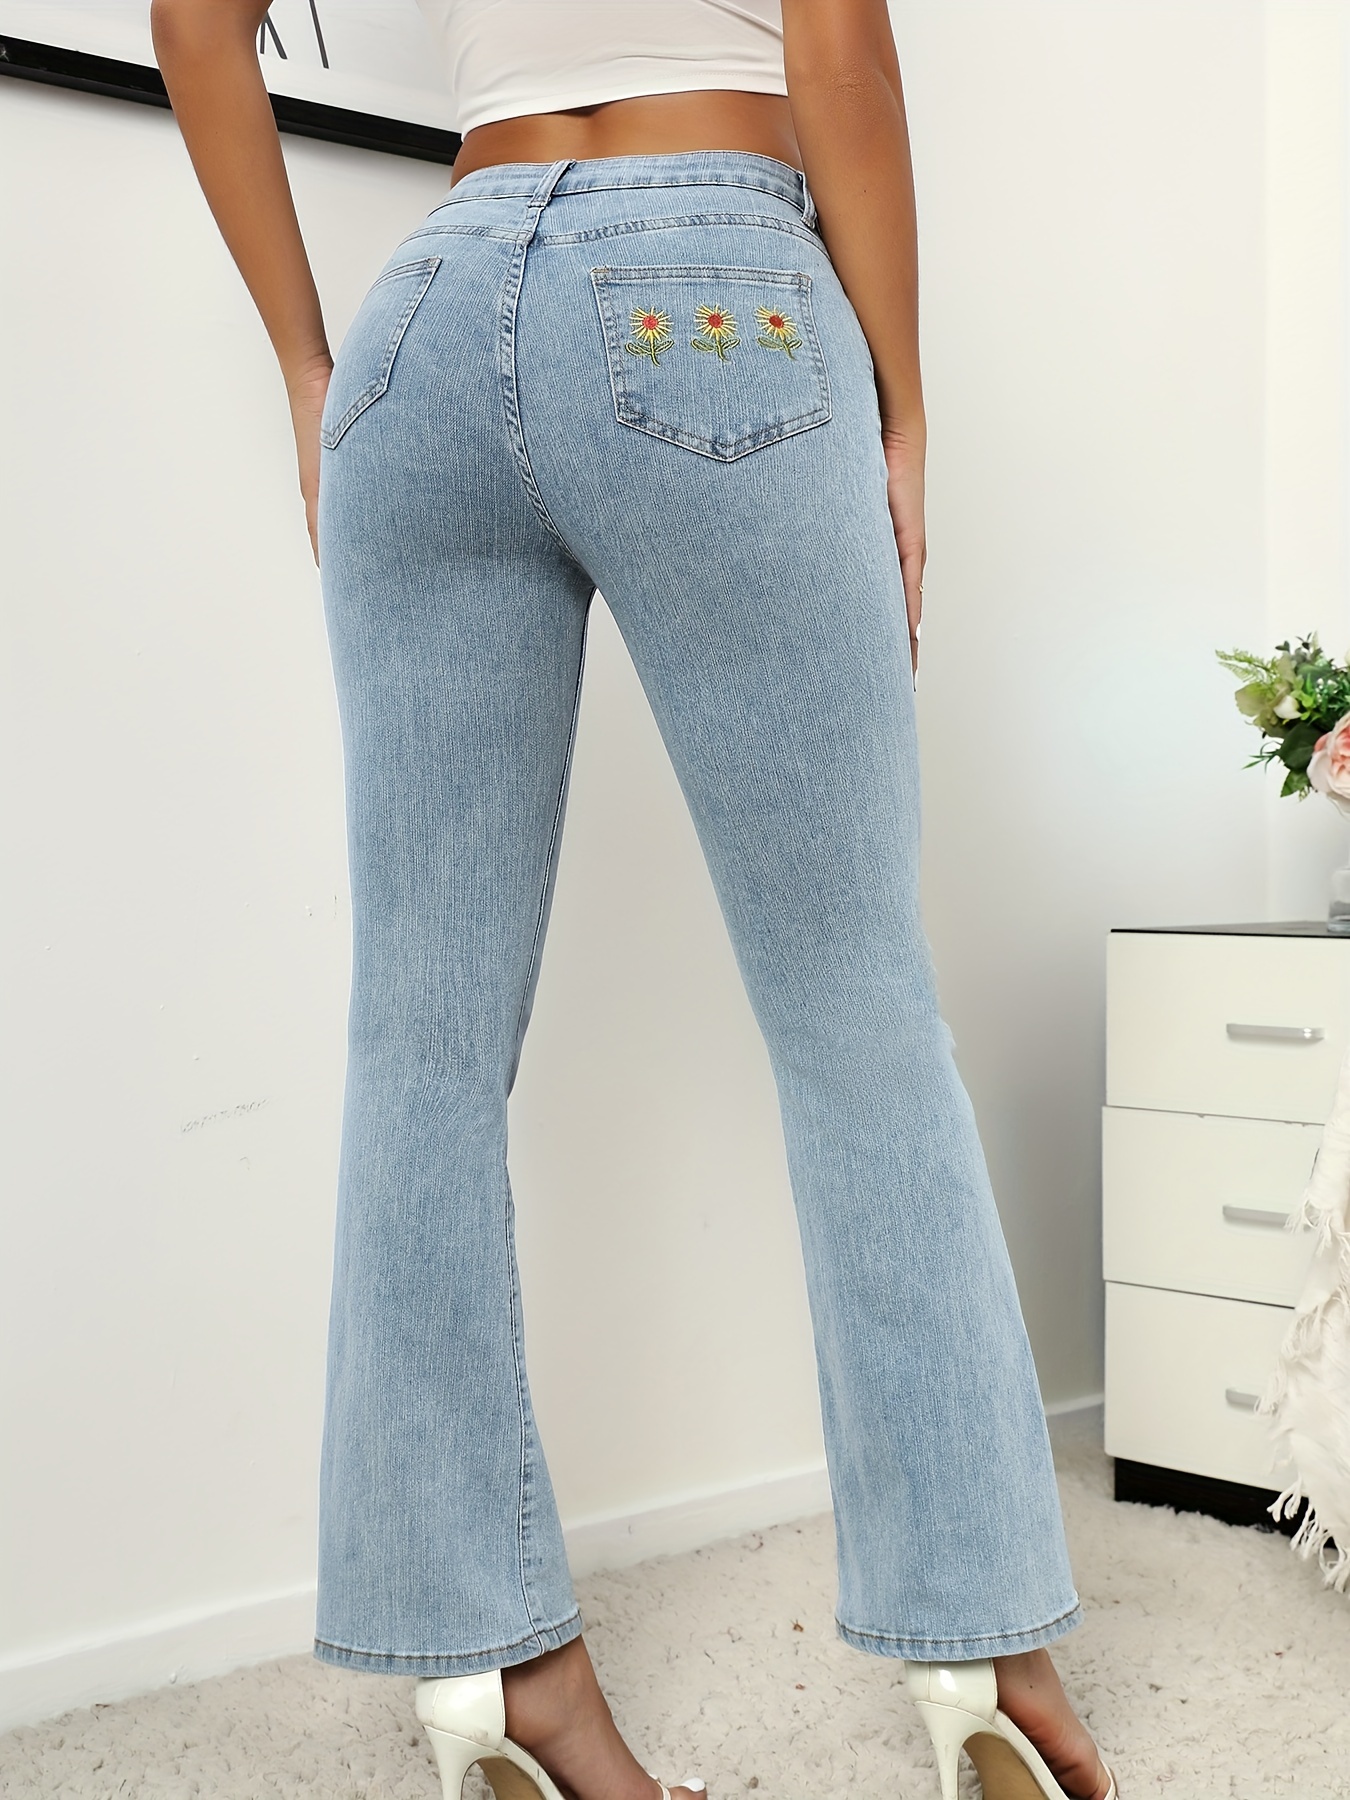 Navy Blue Floral Embroidered Flare Jeans, Mid-Stretch Slim Fit Bell Bottom  Jeans, Women's Denim Jeans & Clothing